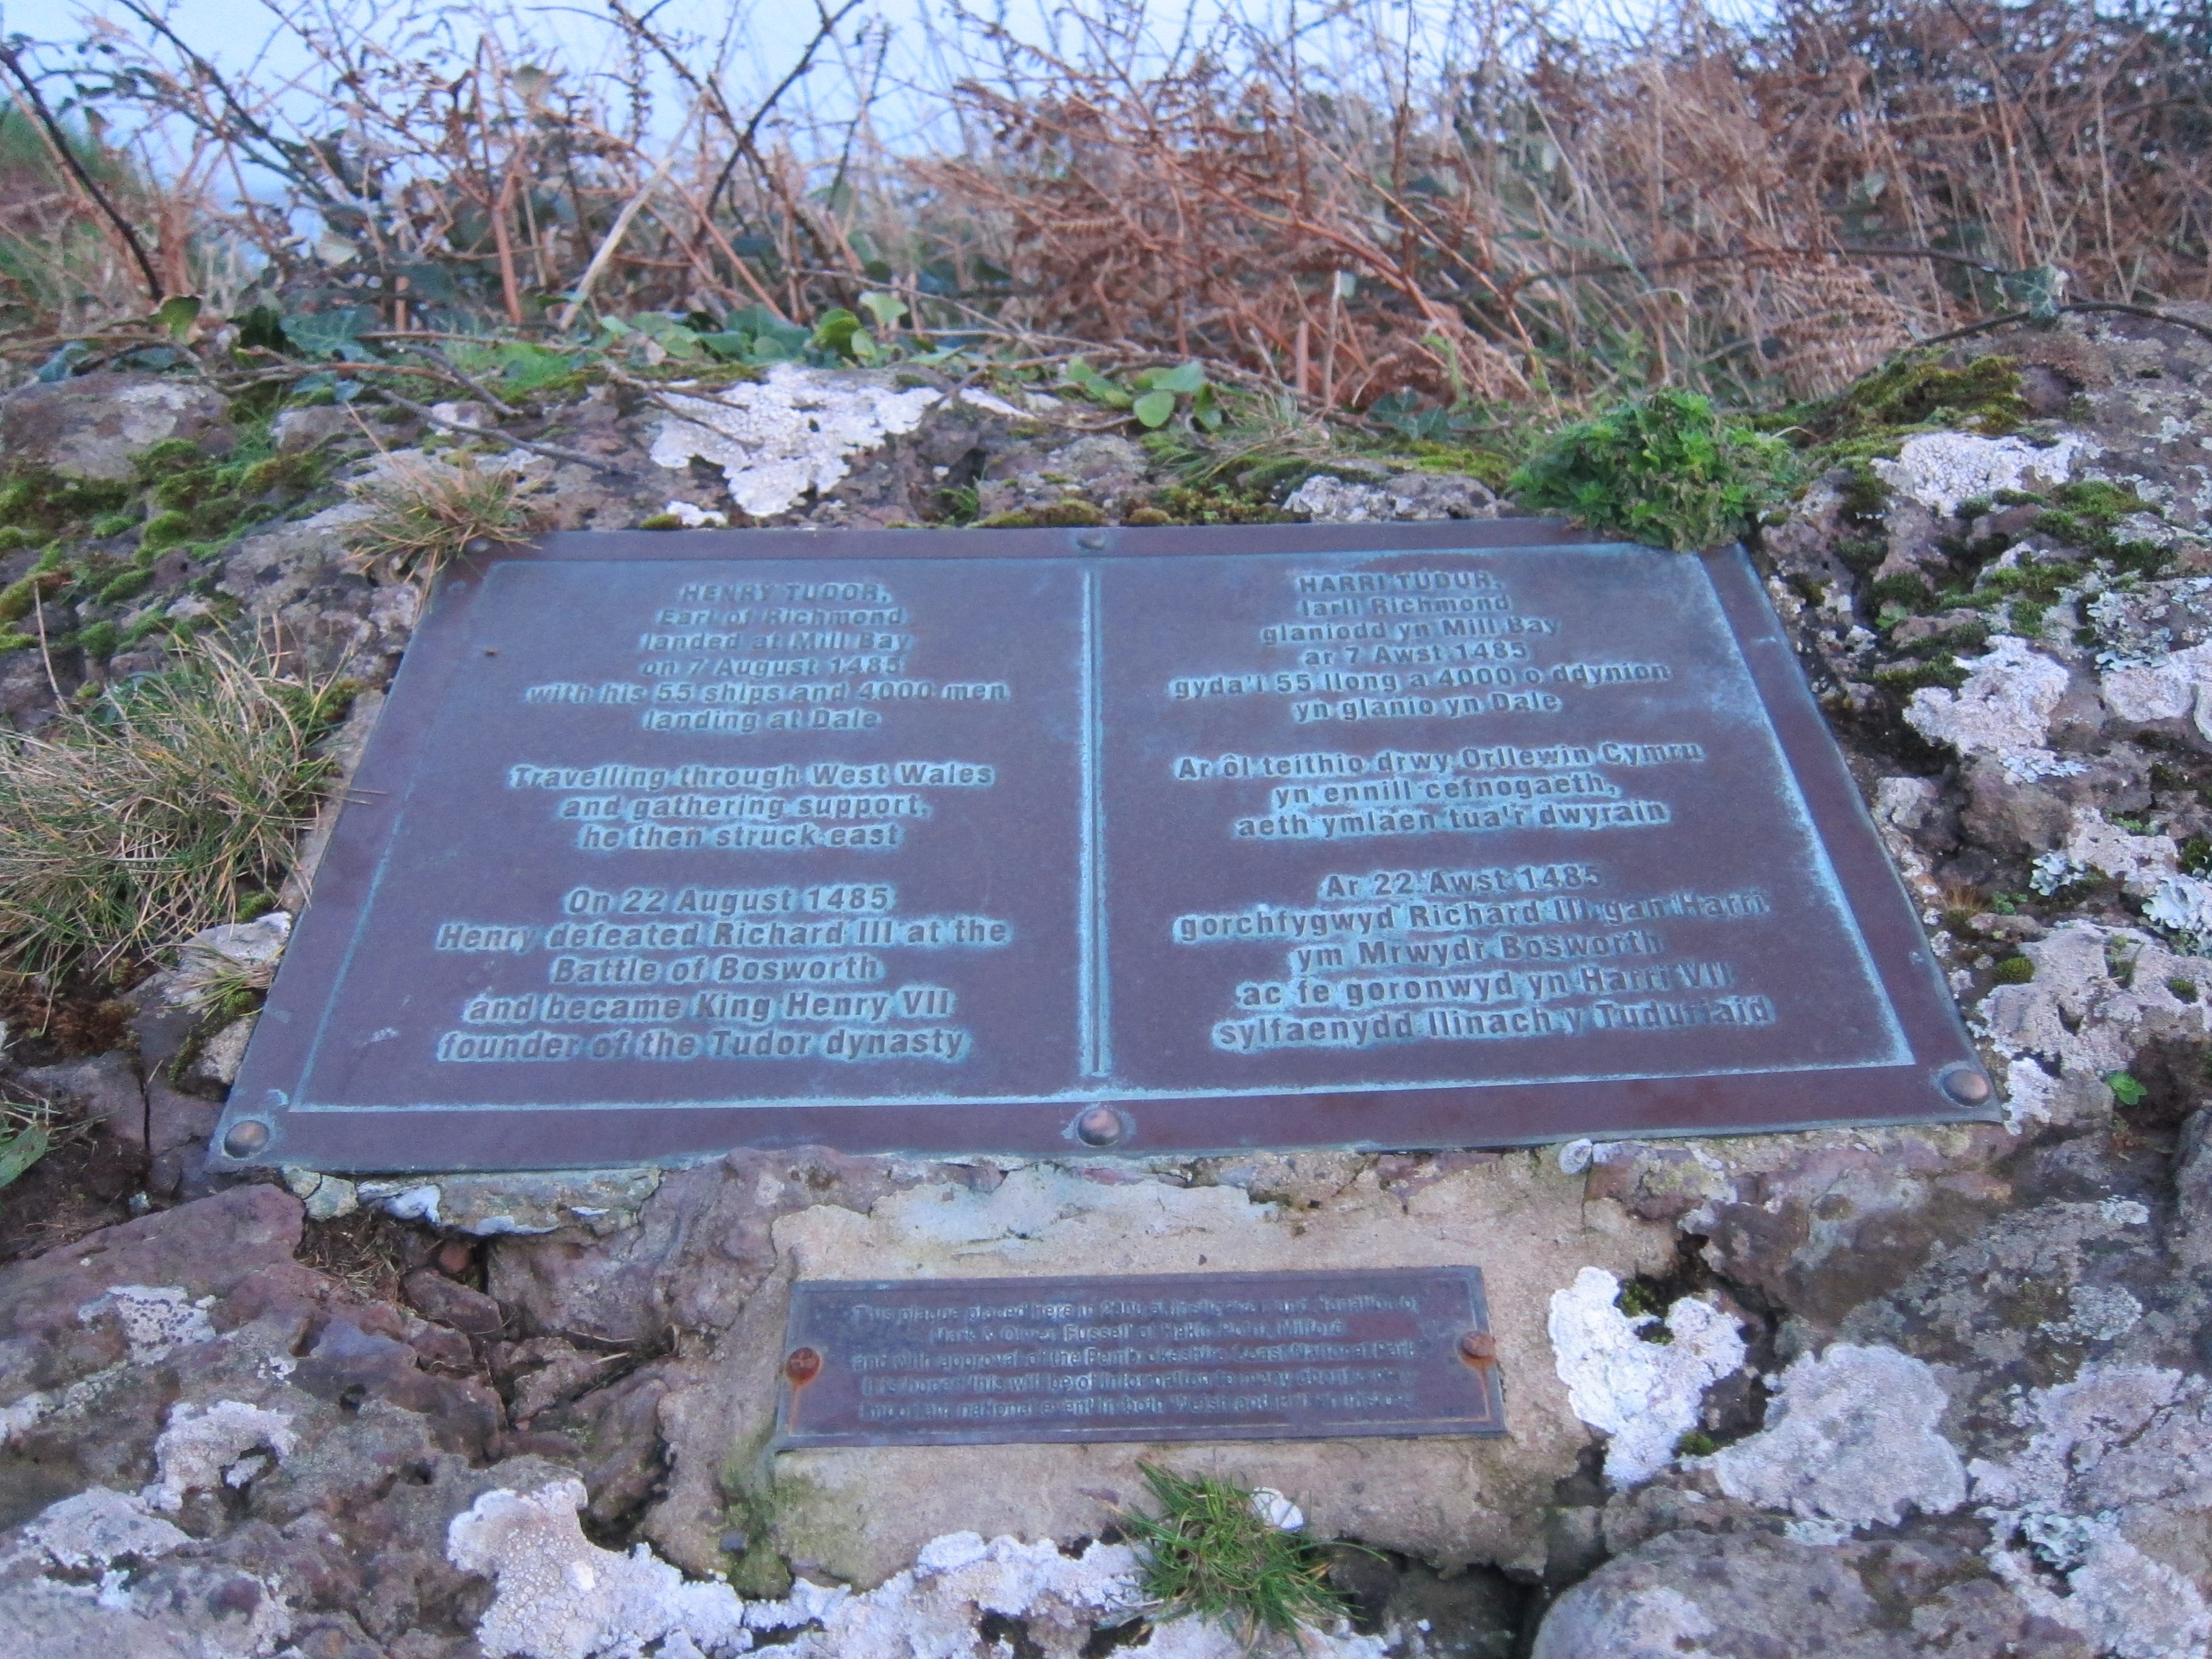 Plaque commemorating landing of Henry, Earl of Richmond.